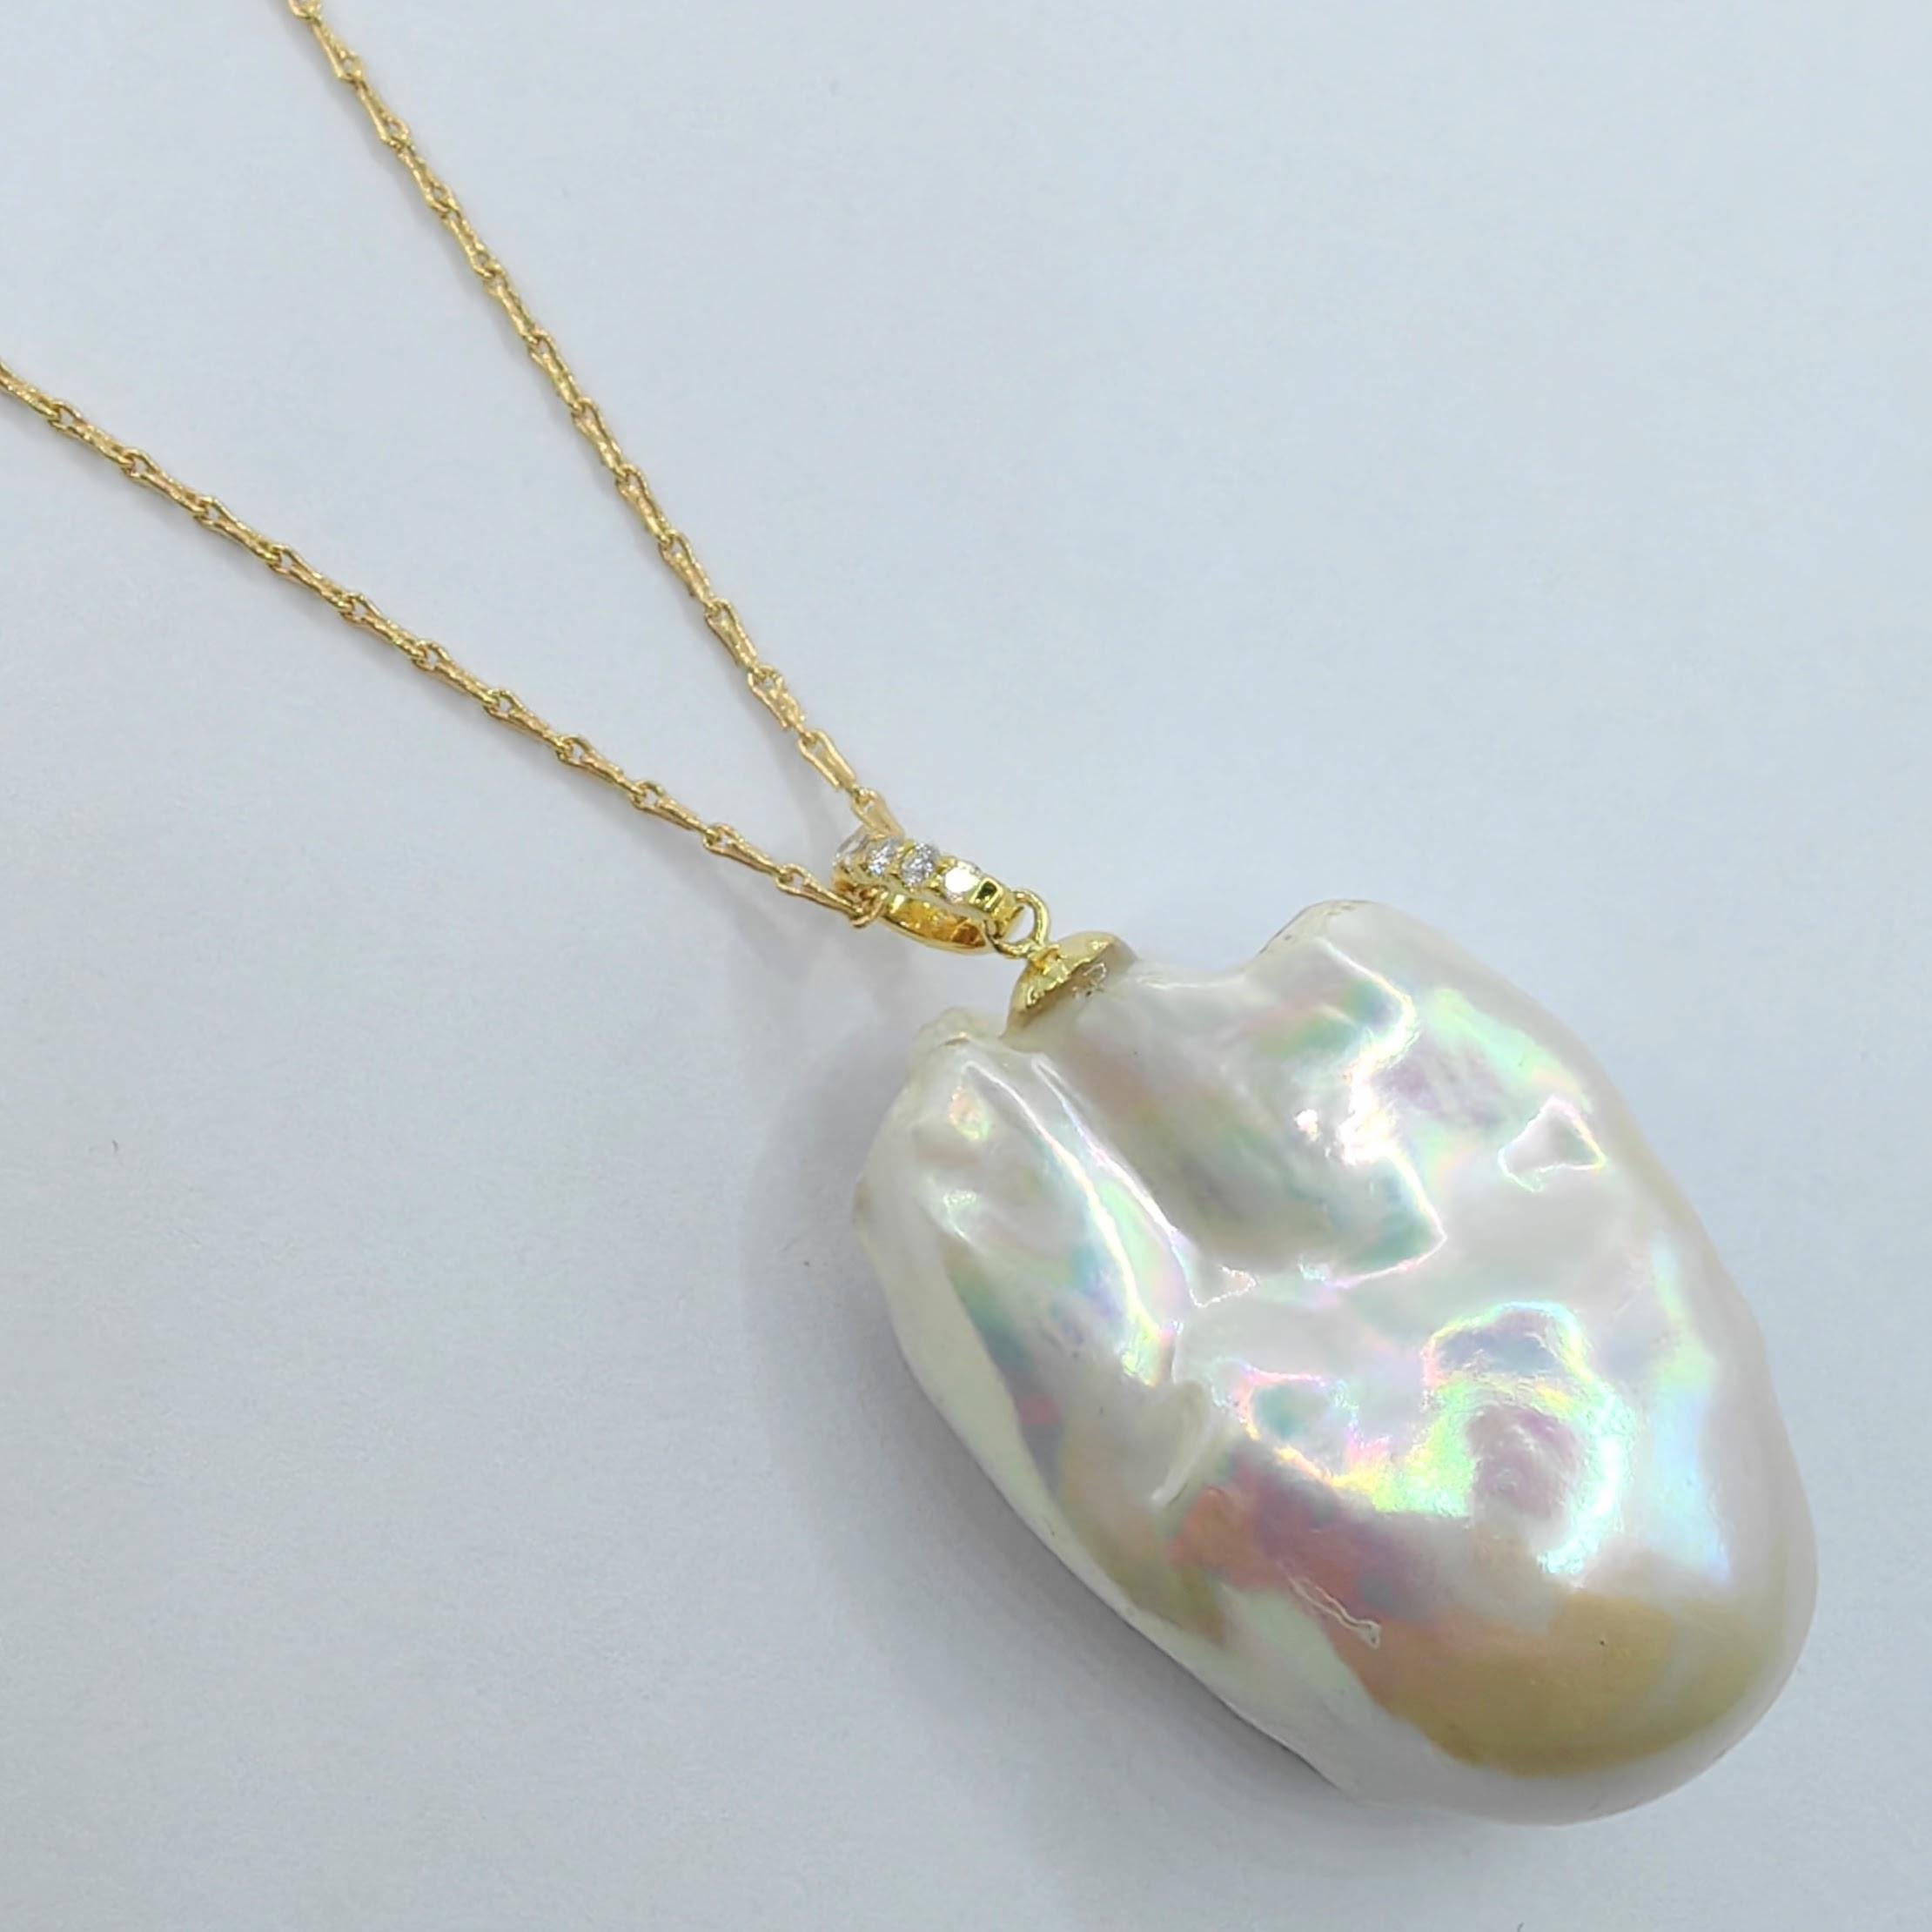 Brilliant Cut 49.24ct Large Iridescent Baroque Pearl Diamond 18K Yellow Gold Necklace Pendant For Sale